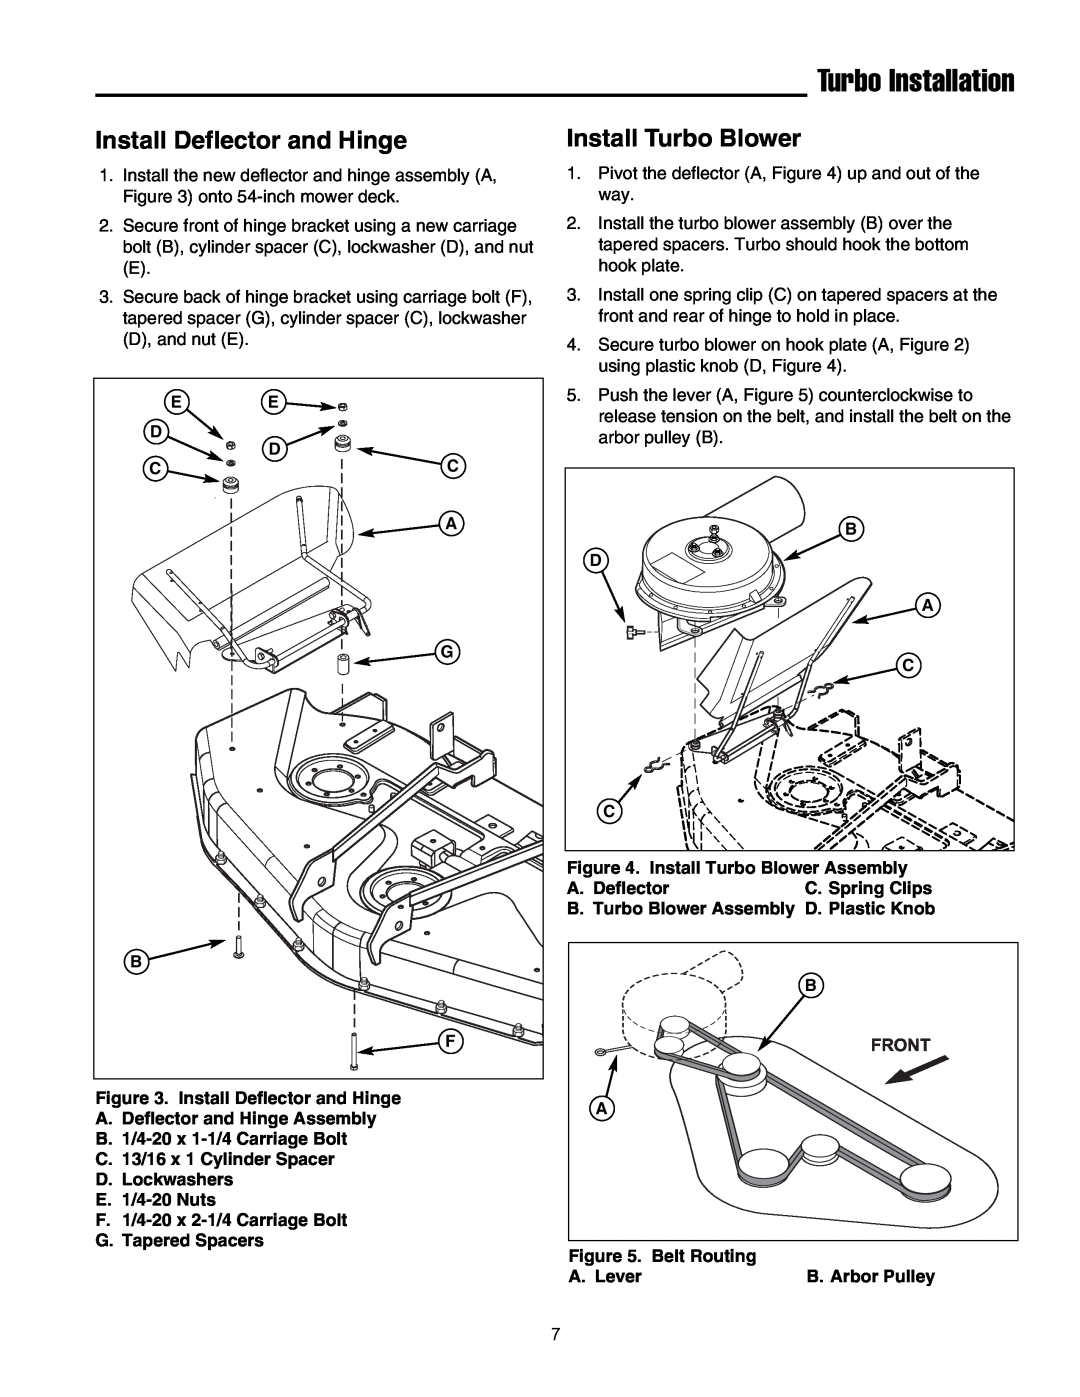 Snapper 1695464 manual Install Deflector and Hinge, Install Turbo Blower, Turbo Installation, Front 